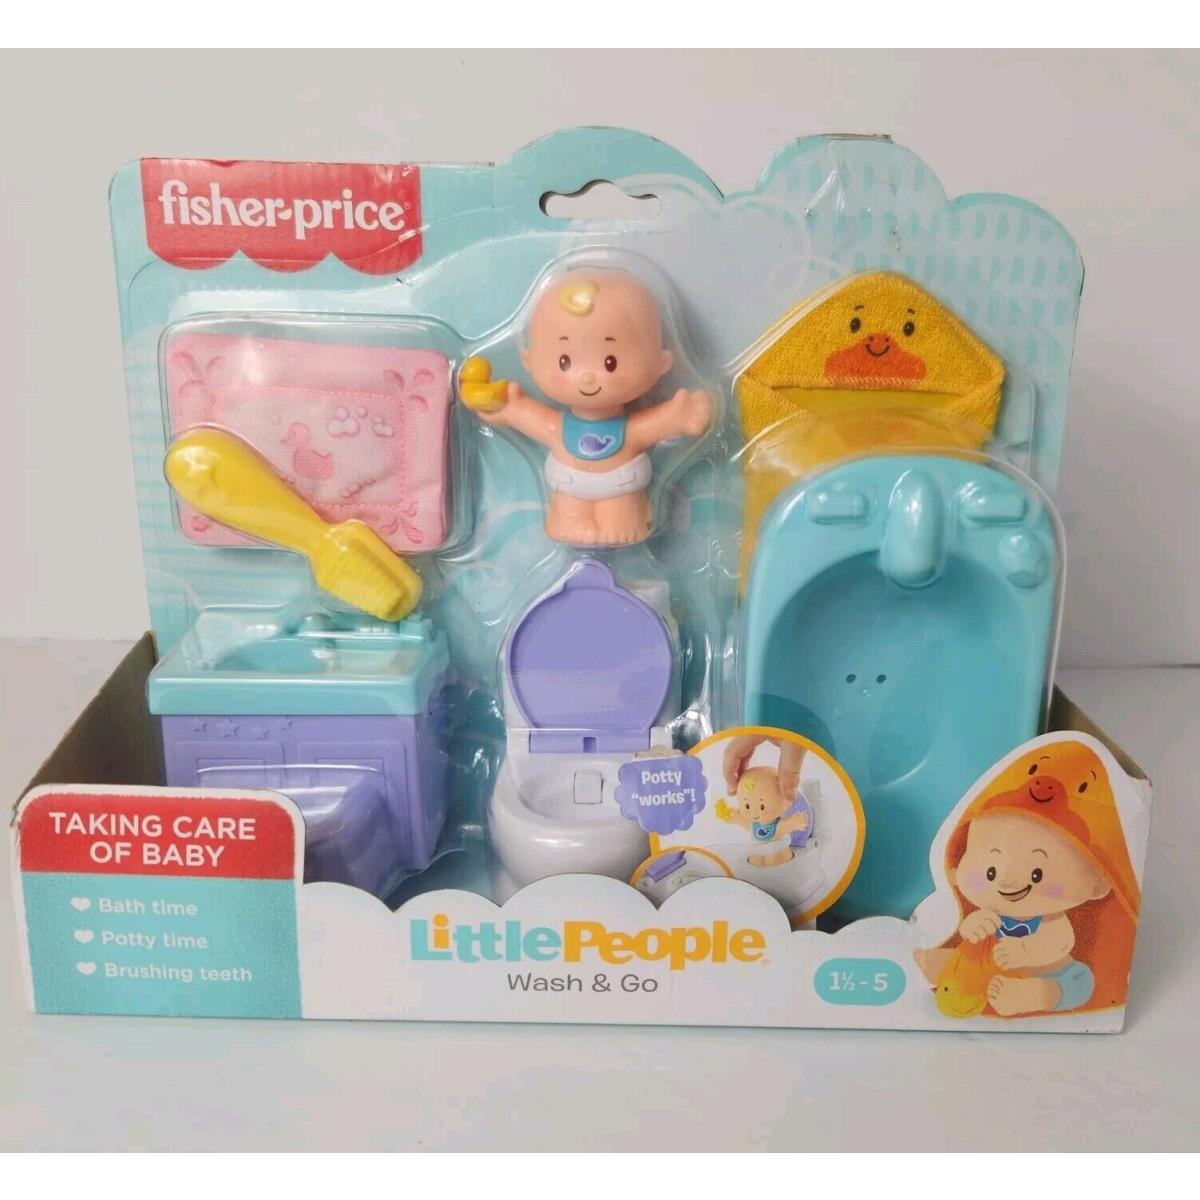 Fisher Price Little People Wash Go Baby Toddler Bathroom Clean Ducky Potty Toy